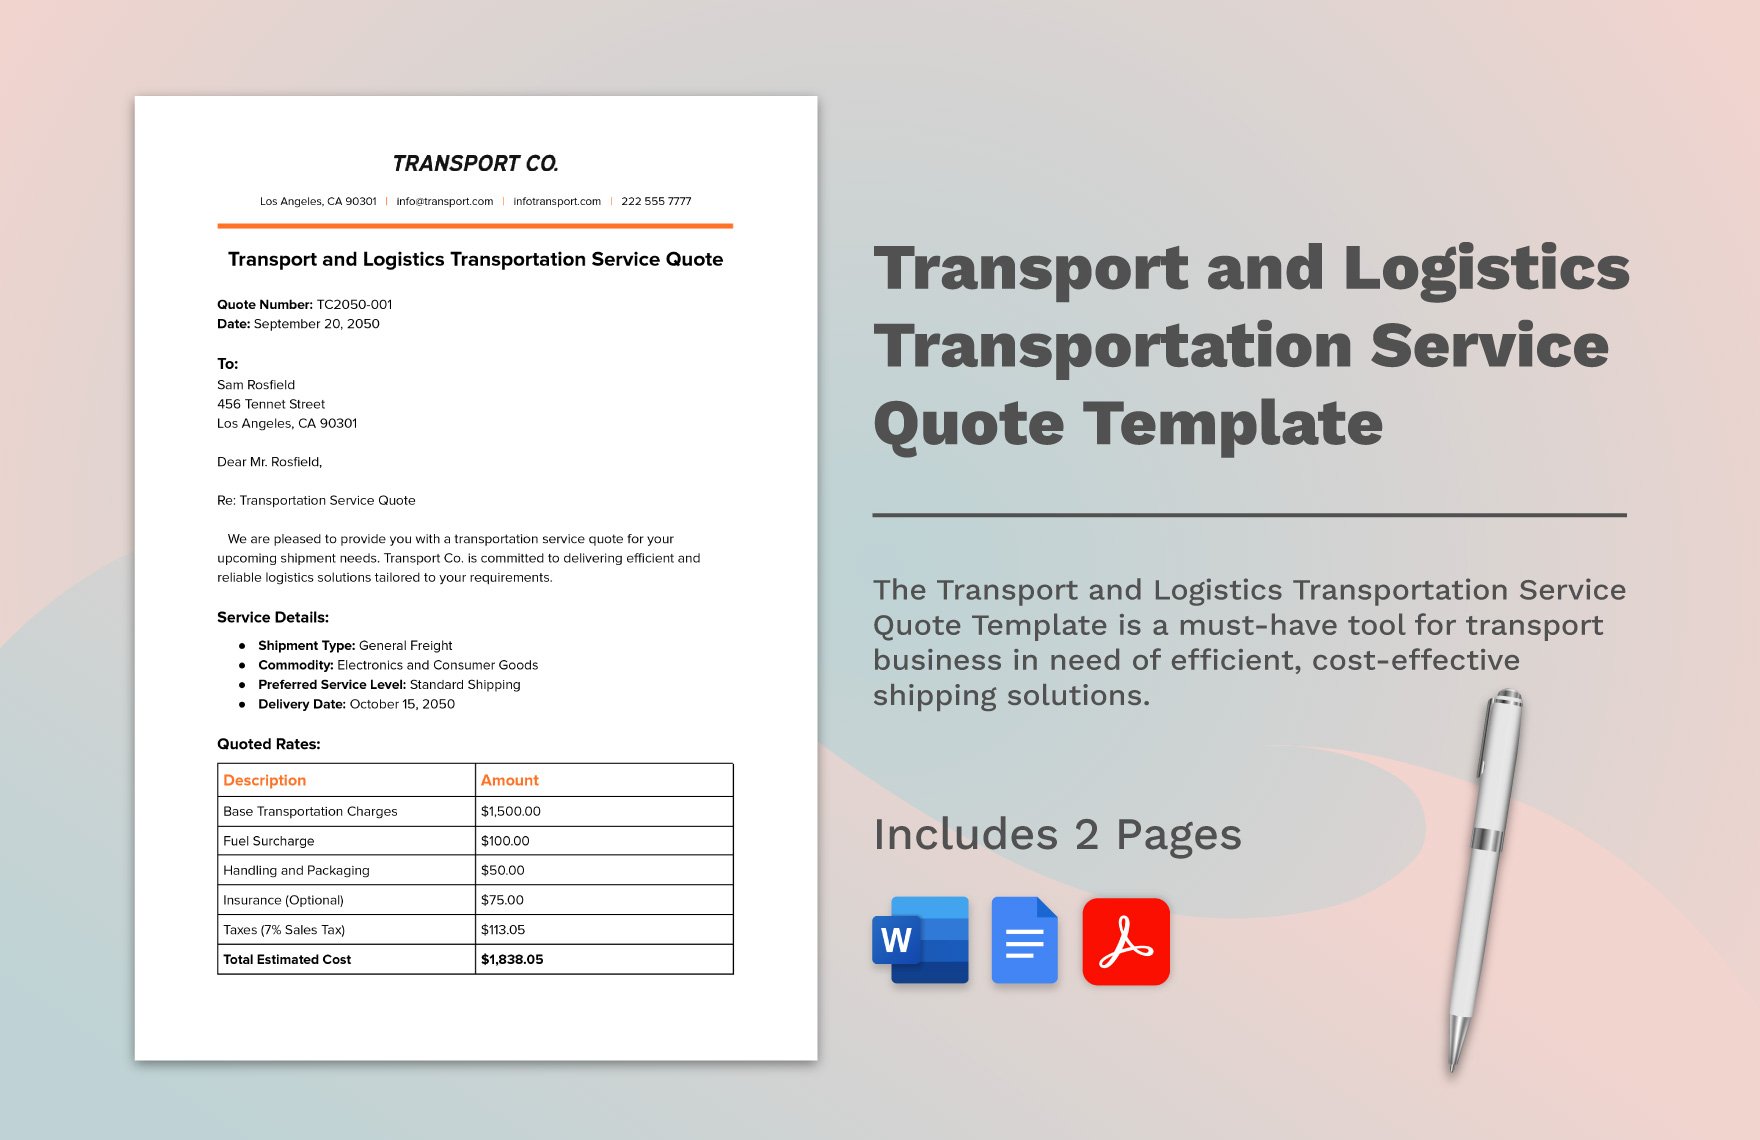 Transport and Logistics Transportation Service Quote Template